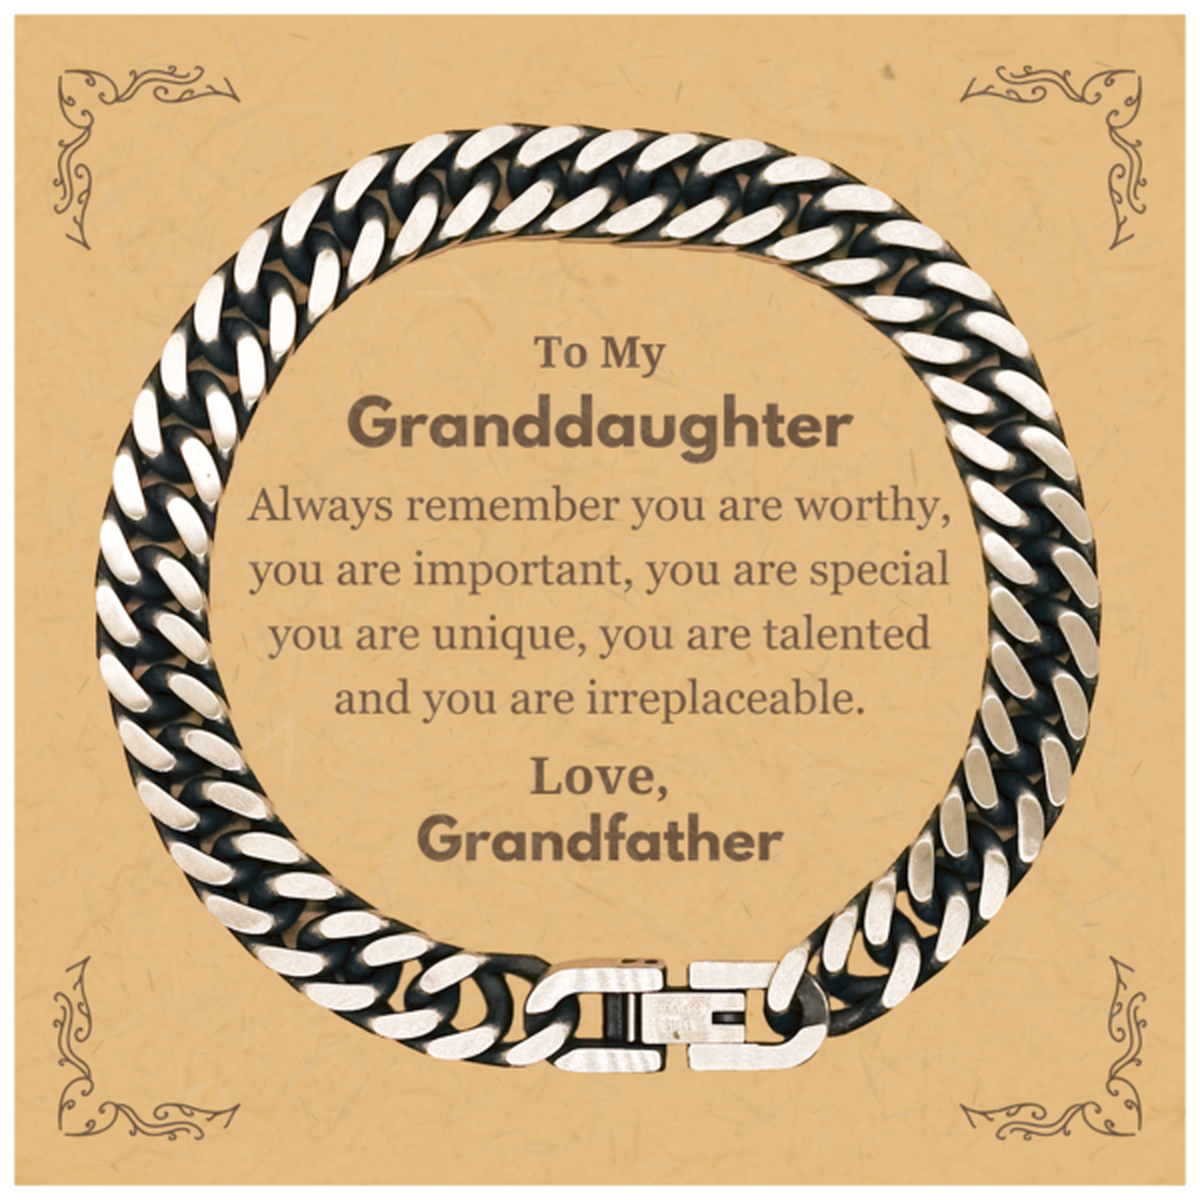 Granddaughter Birthday Gifts from Grandfather, Inspirational Cuban Link Chain Bracelet for Granddaughter Christmas Graduation Gifts for Granddaughter Always remember you are worthy, you are important. Love, Grandfather